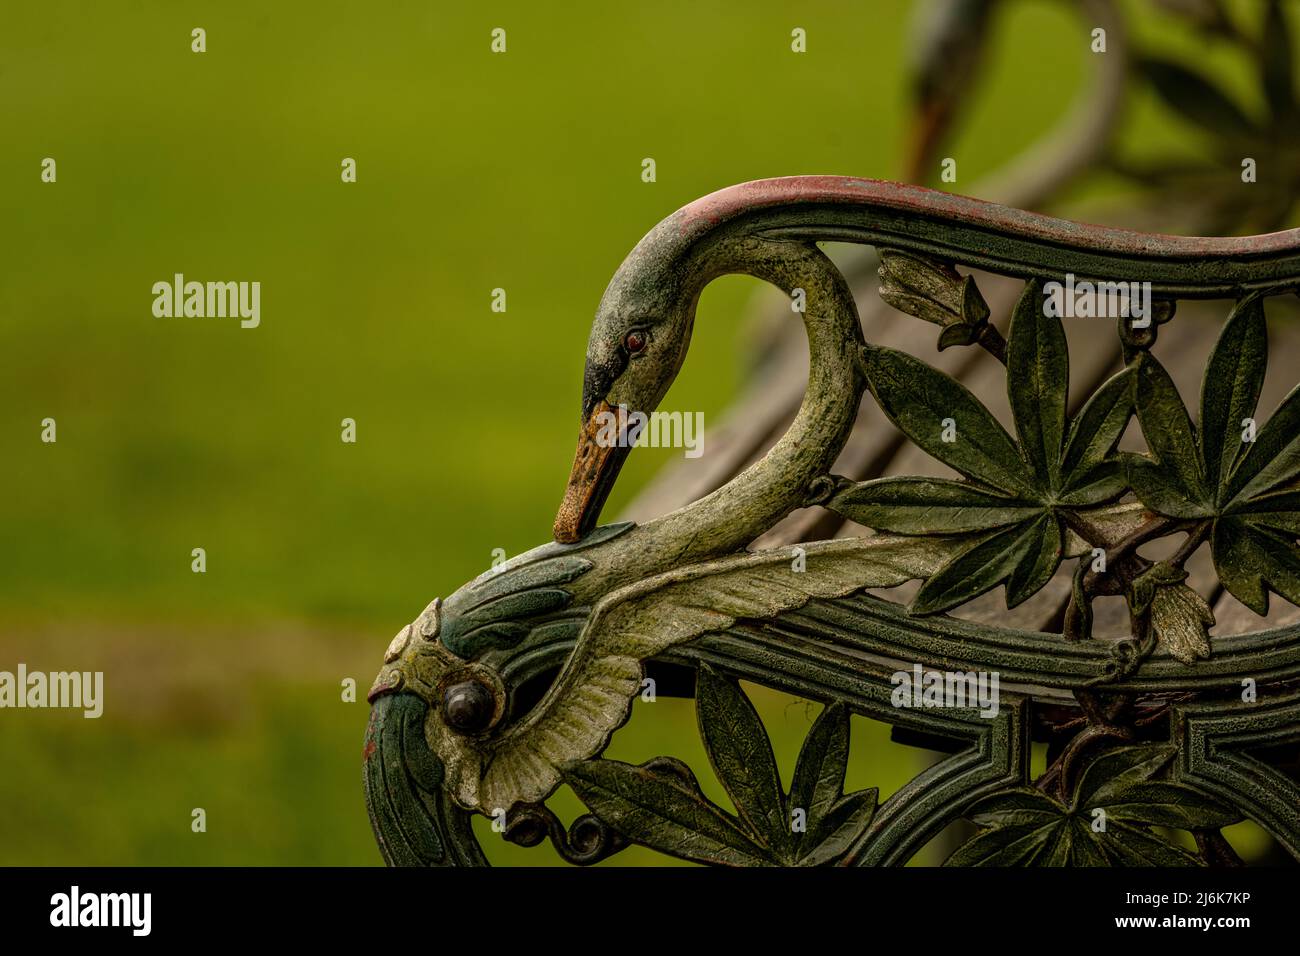 Swan neck in ornate metalwork on a bench in the garden at Chatsworth House, Derbyshire, UK Stock Photo